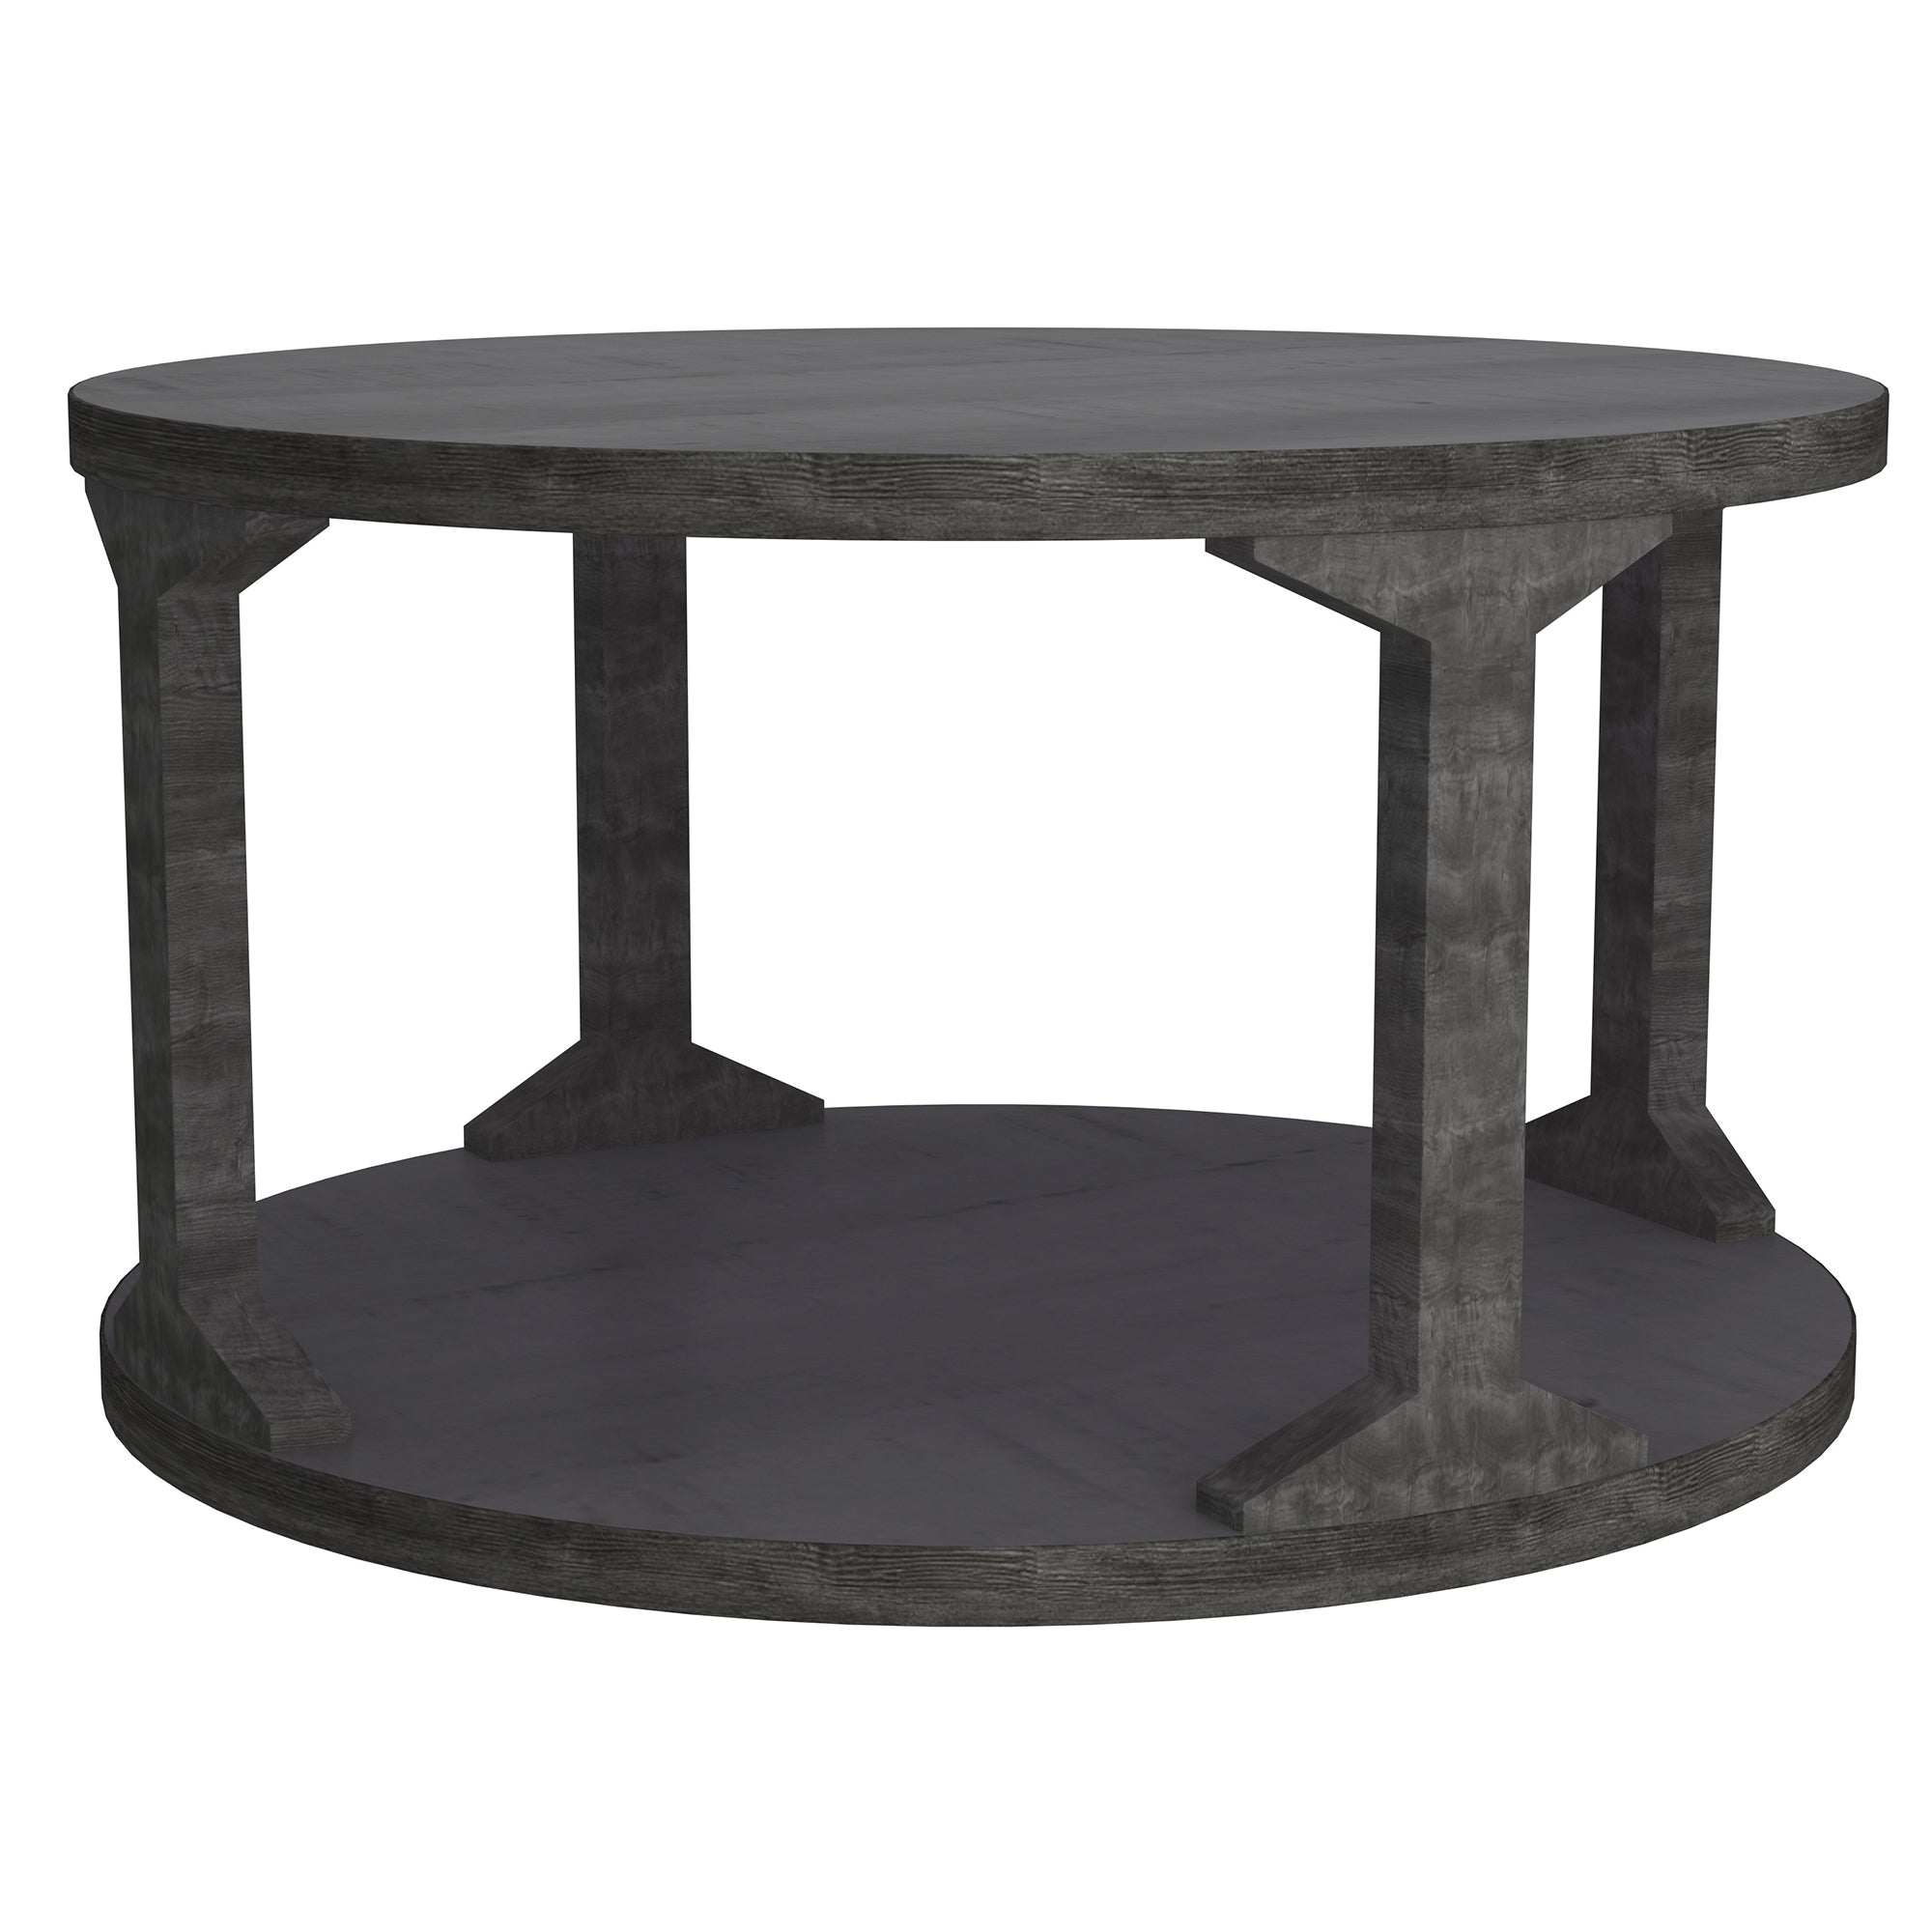 Avni Round Coffee Table in Distressed